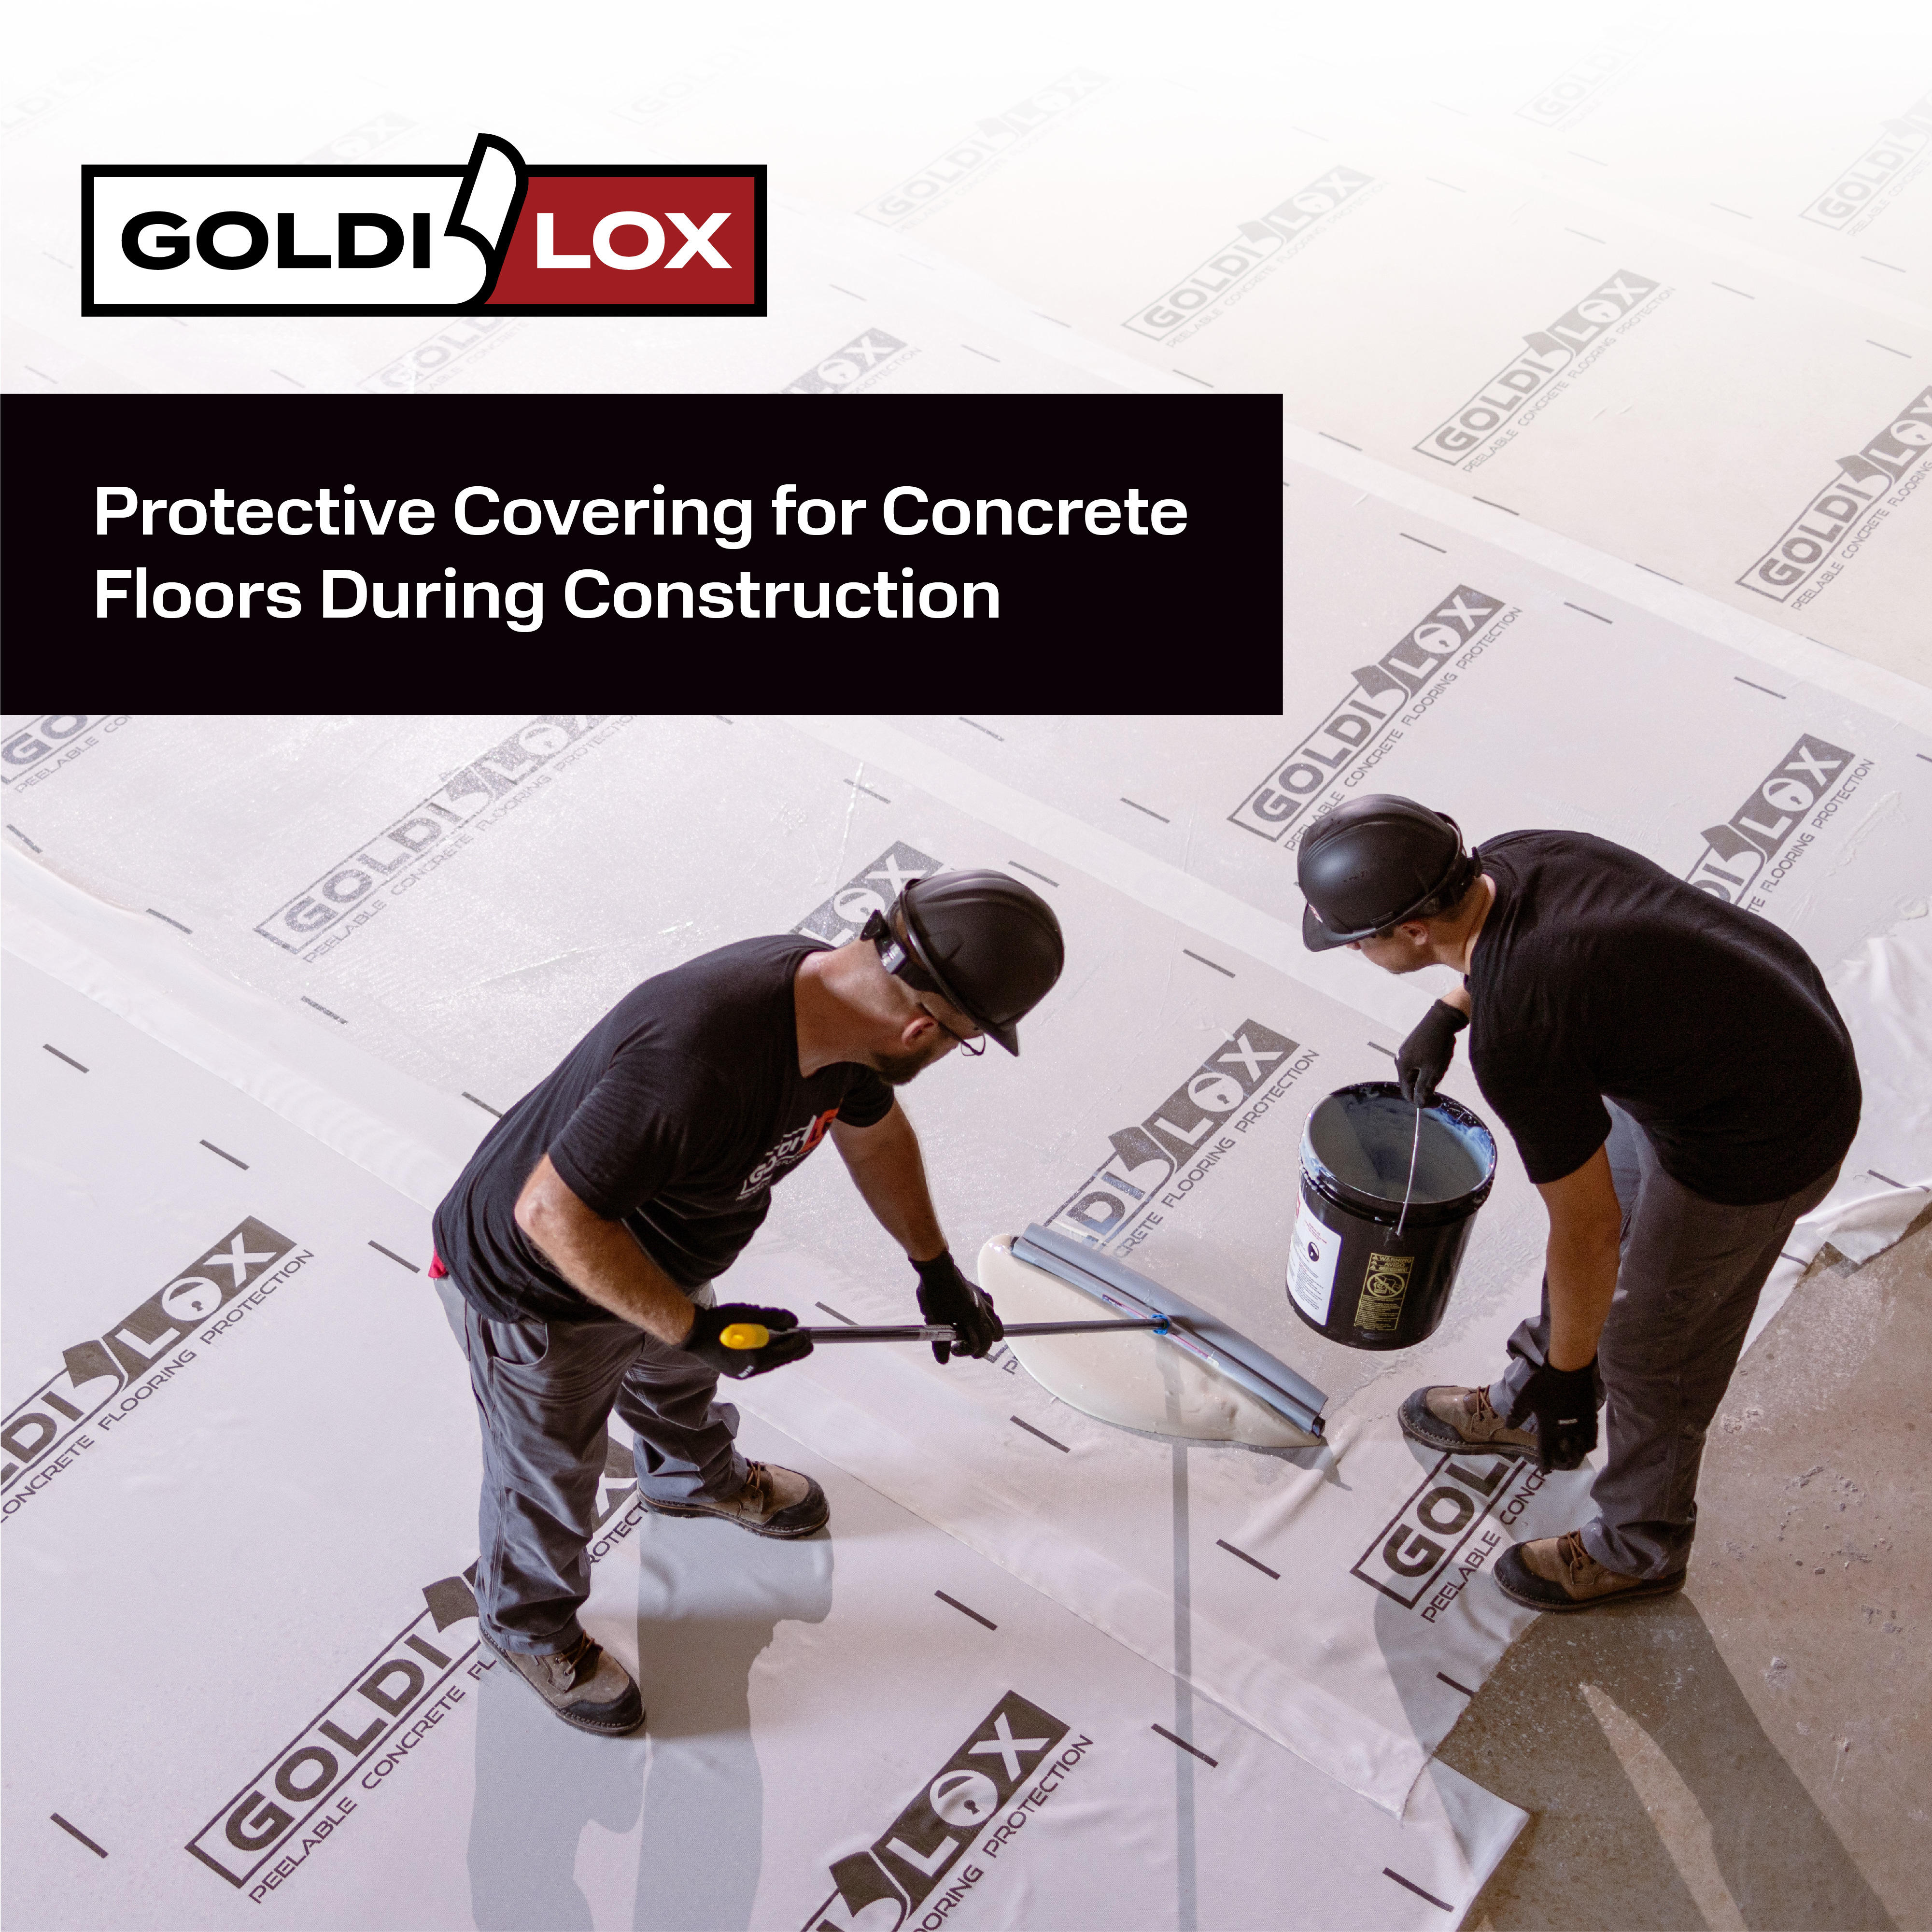 Goldilox is a Protective Covering for Concrete Flooring During Construction